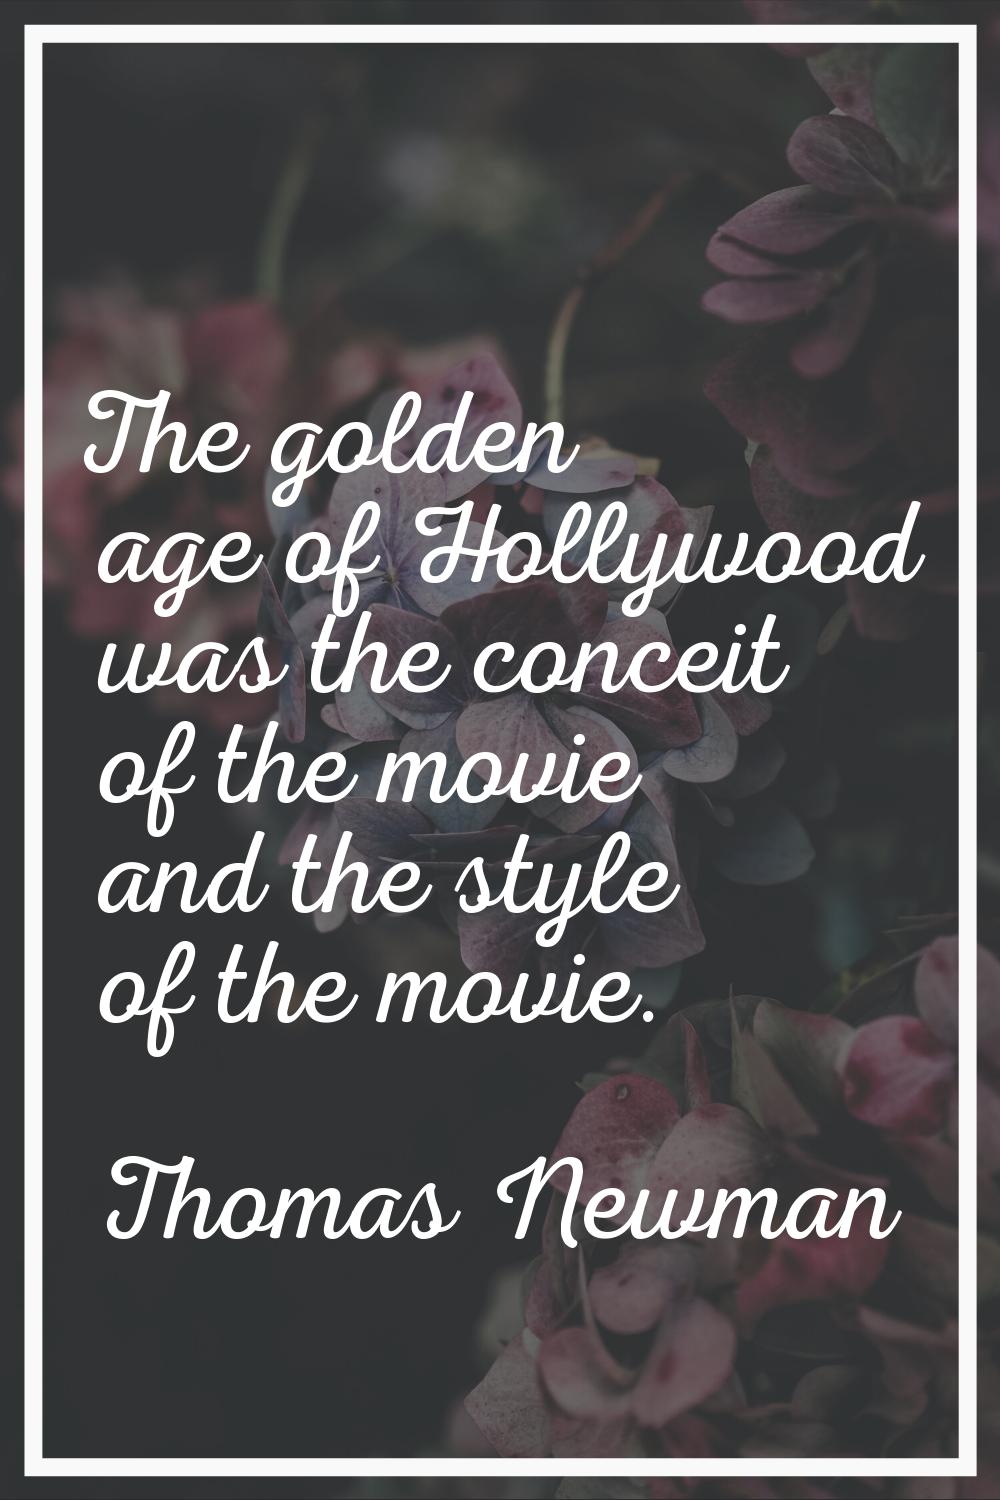 The golden age of Hollywood was the conceit of the movie and the style of the movie.